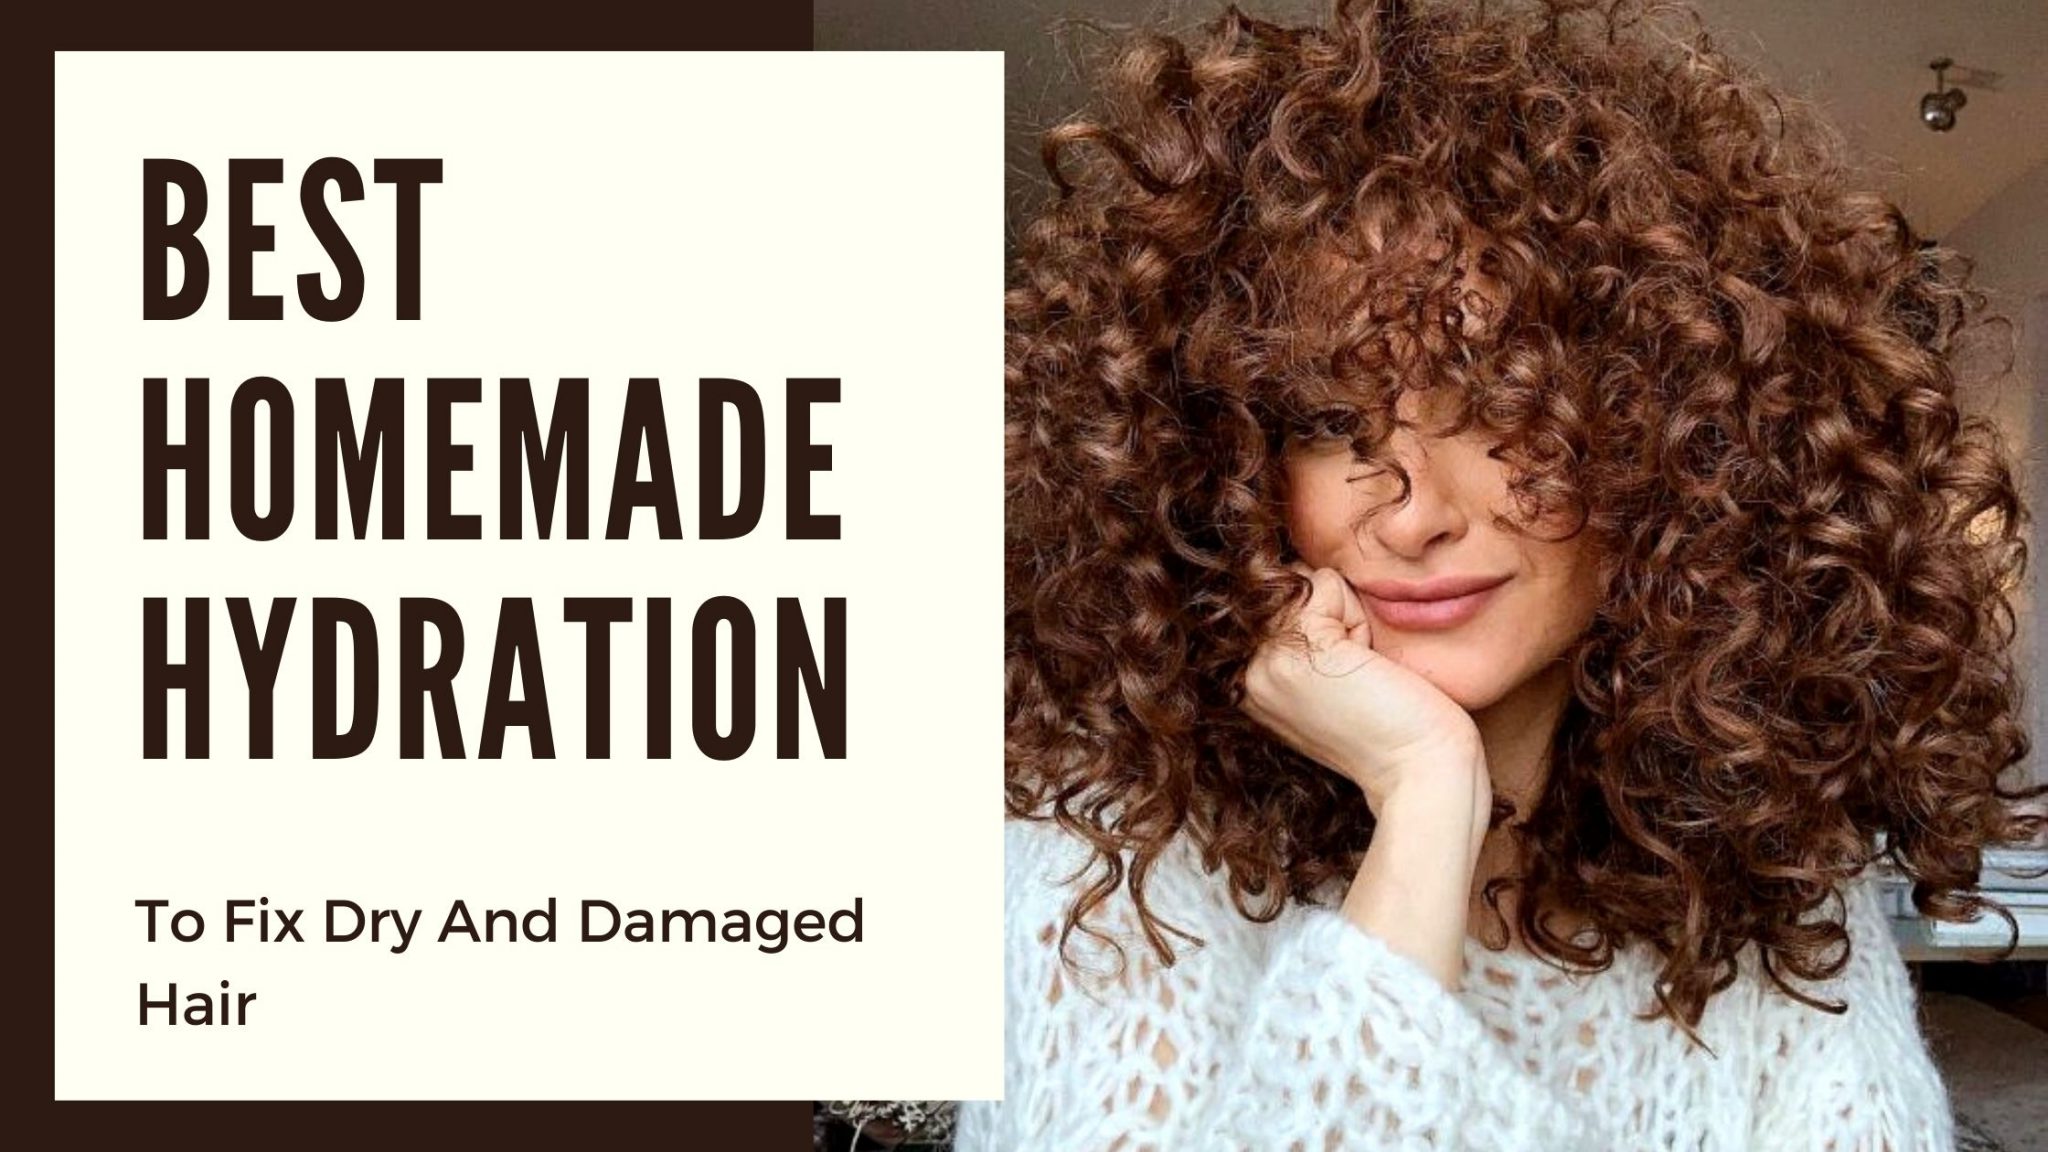 Best Homemade Hydration Ways Helps You To Fix Dry And Damaged Hair